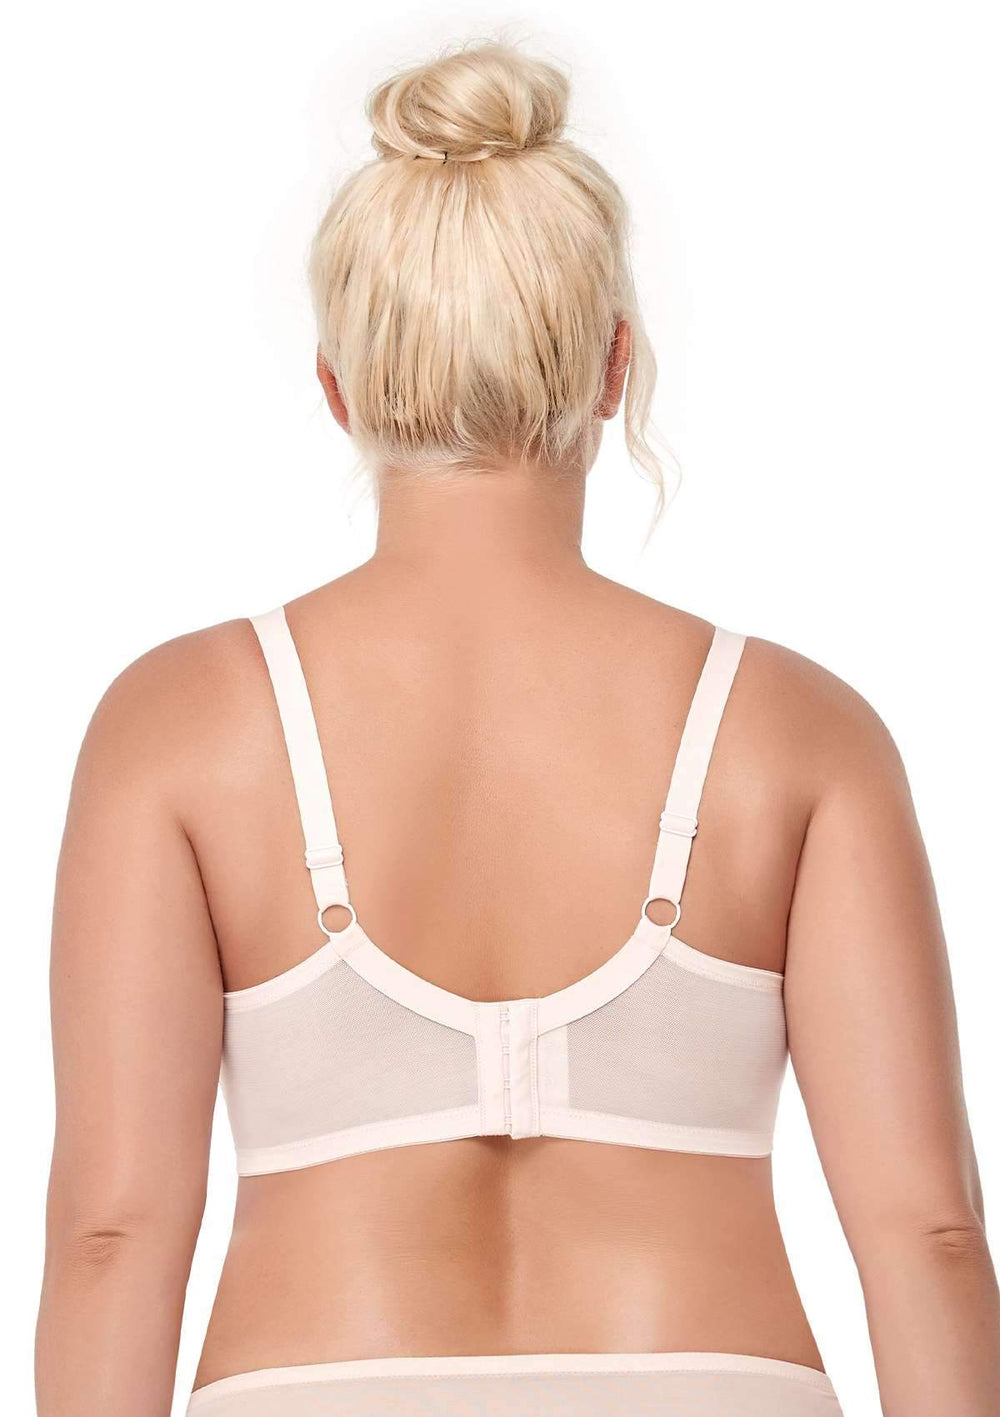 HSIA Forget Me Not Thin Bra: Wide Band Bra for Wide Set Breasts